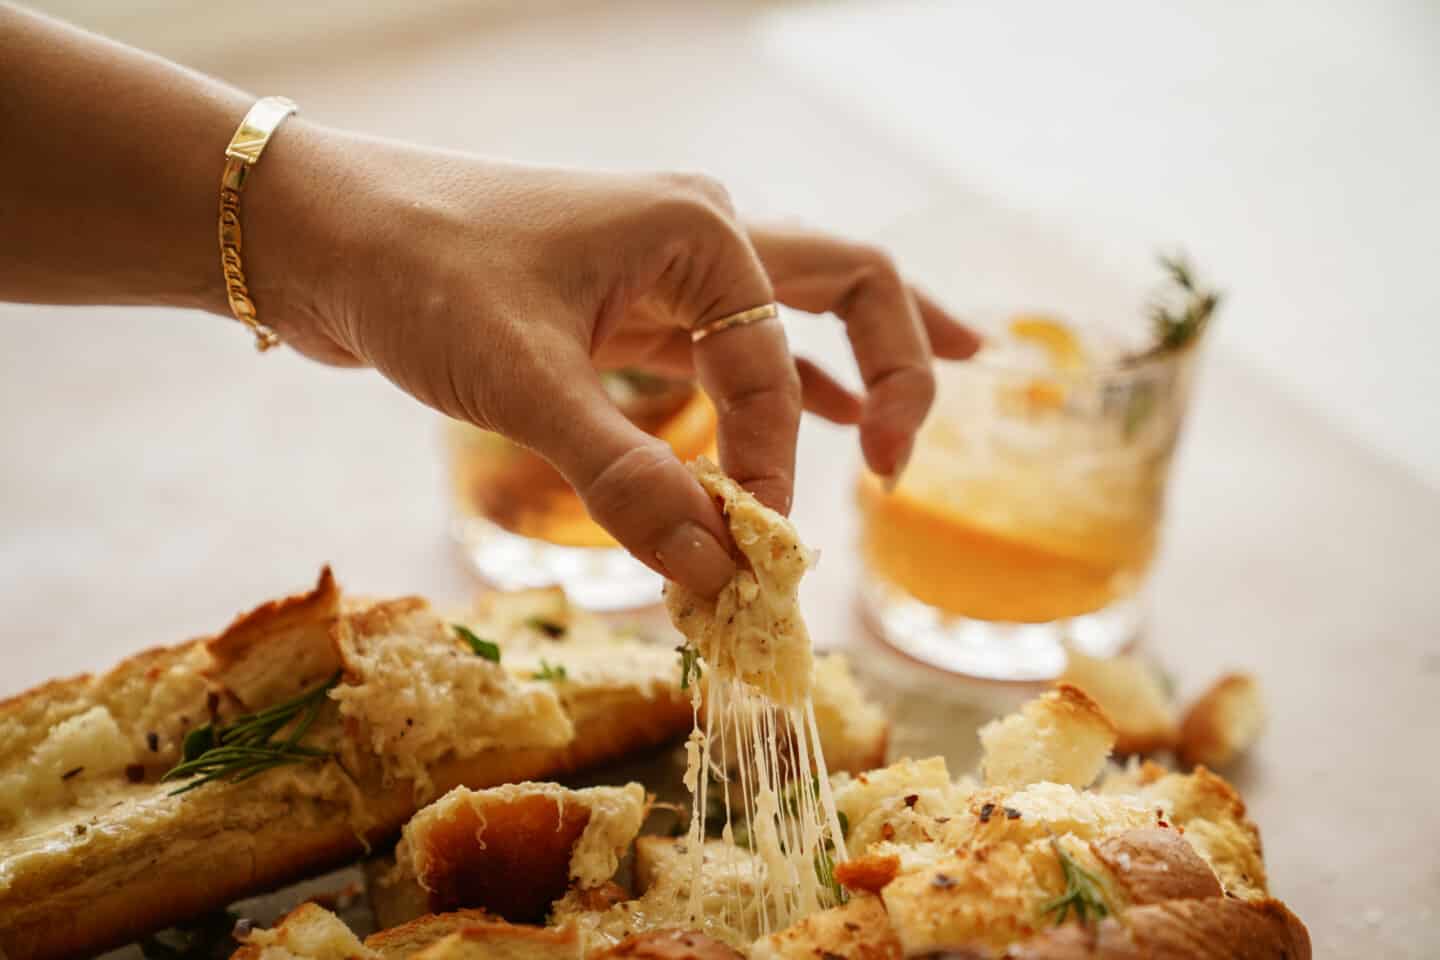 Hand pulling apart cheese bread with cocktail in the back